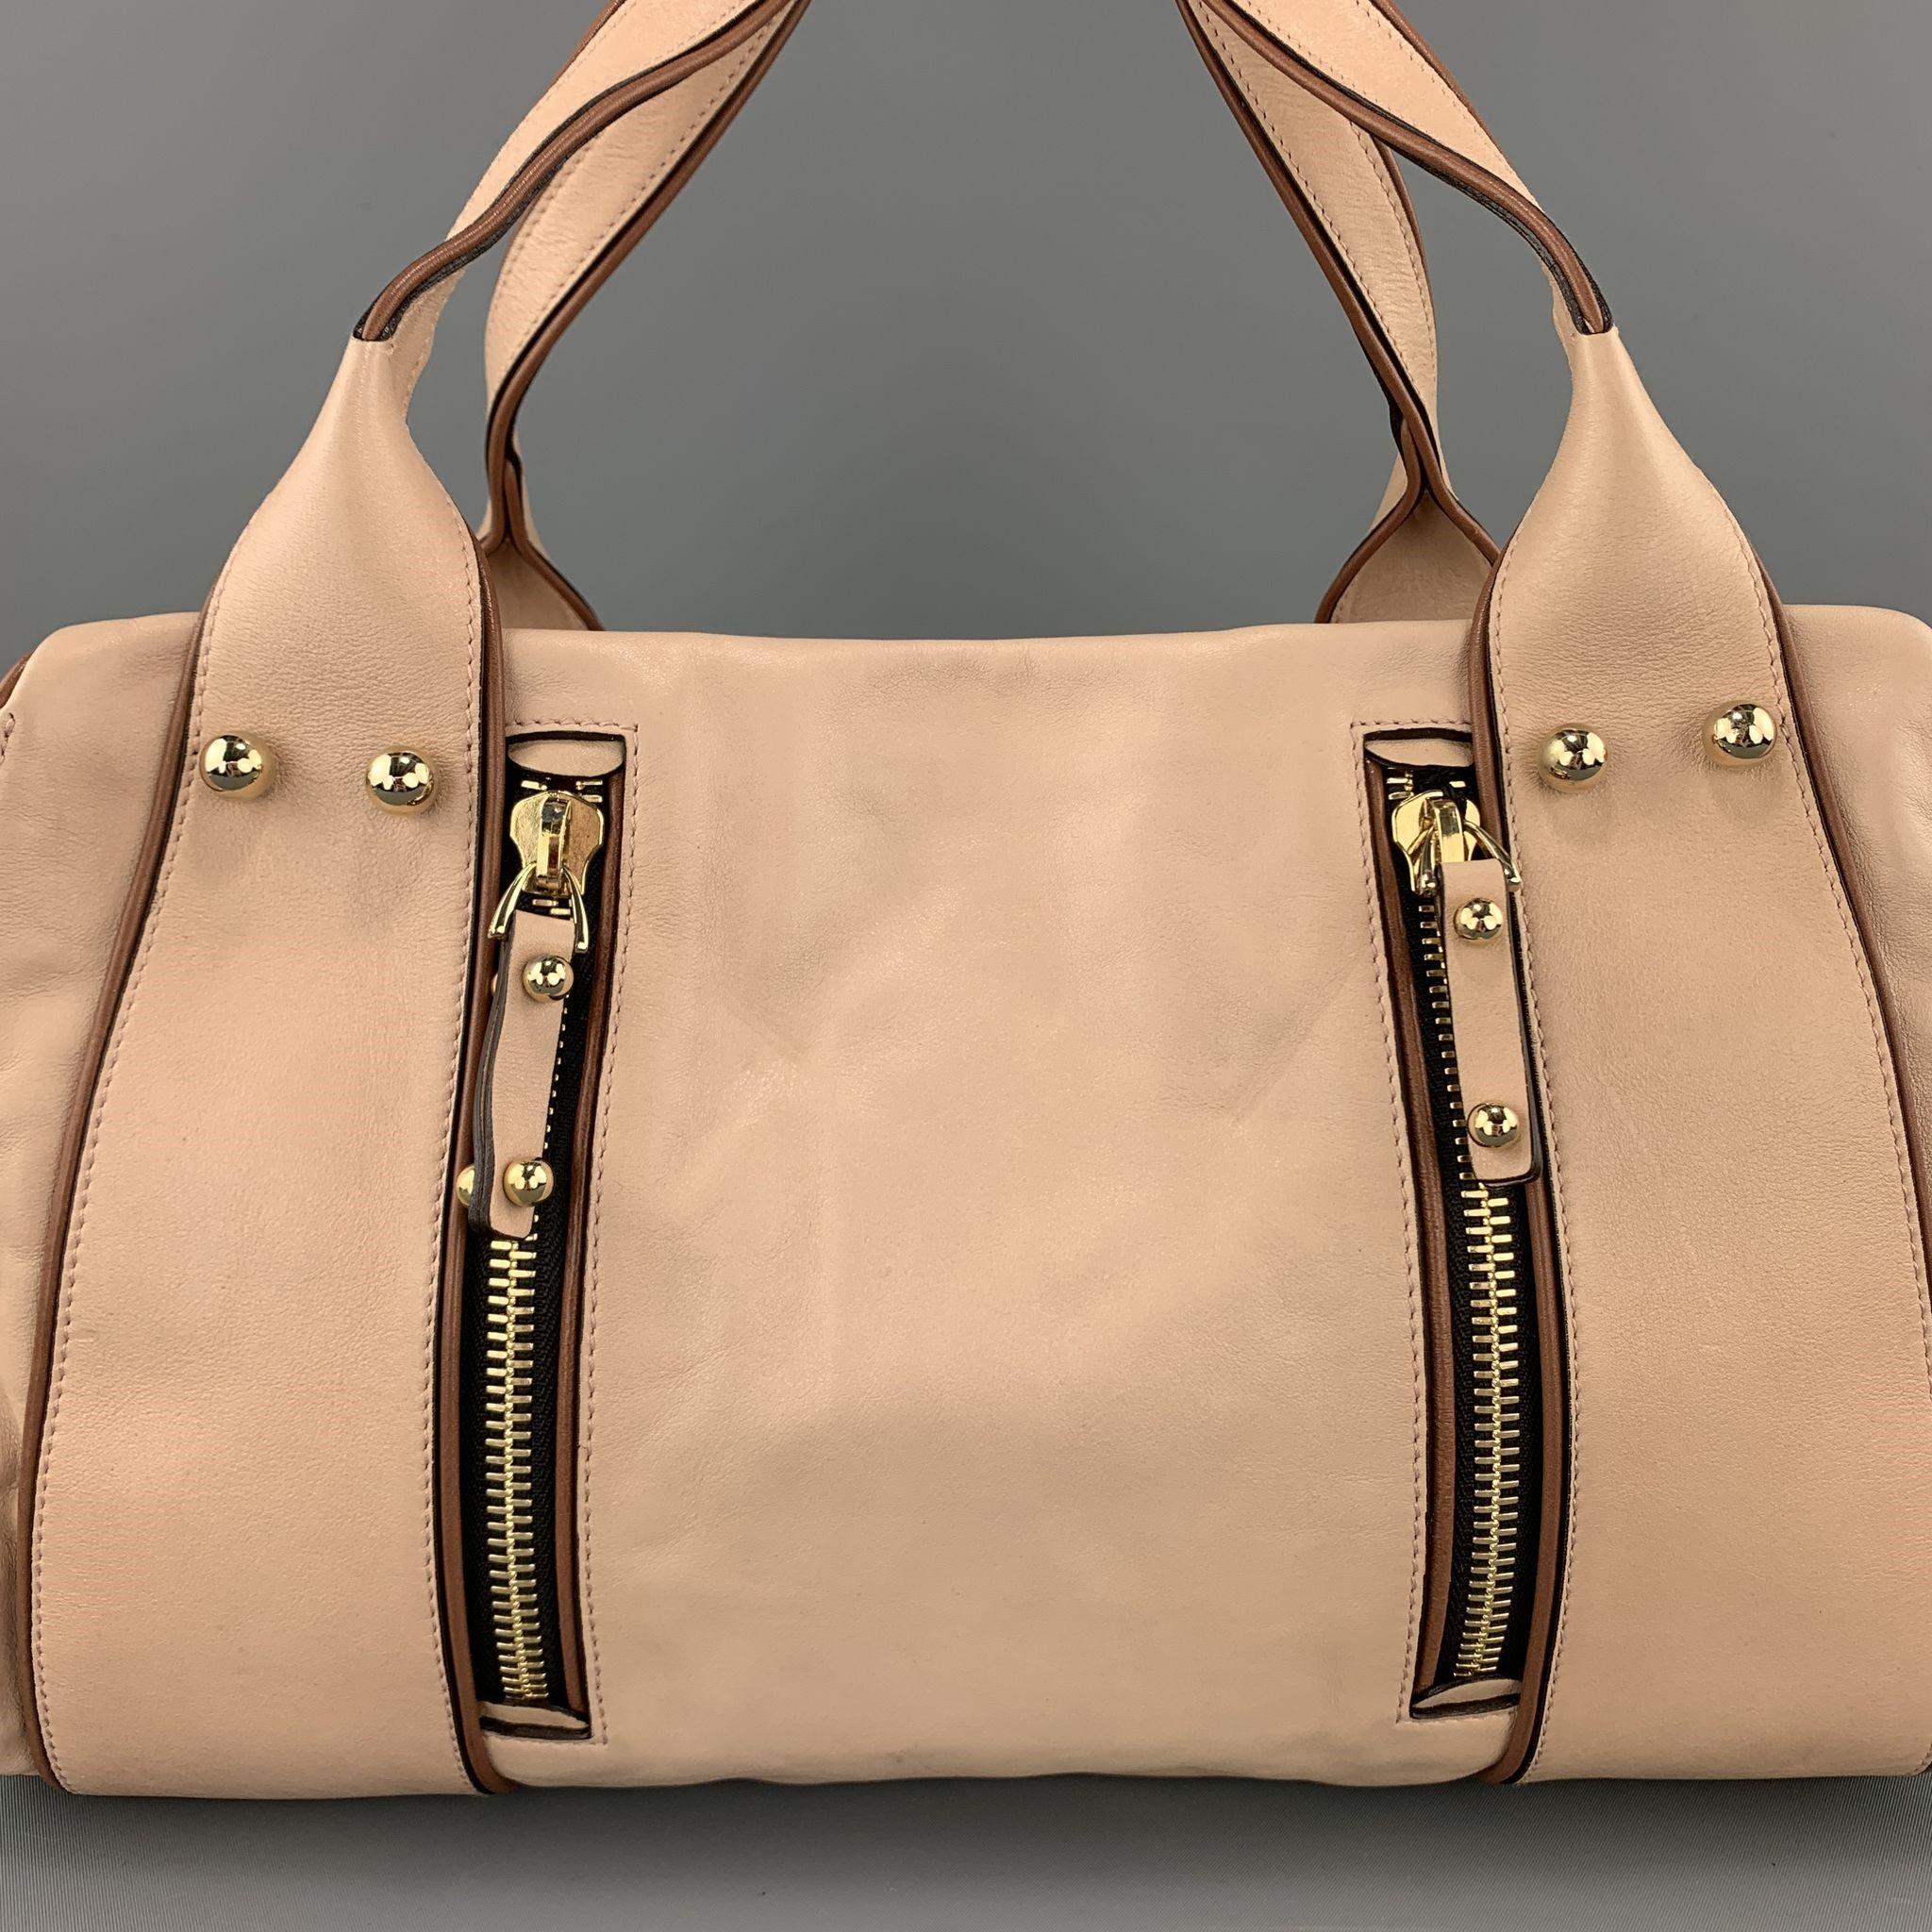 MISSONI shoulder bag comes in muted light pink smooth leather with tan leather piping, double zip pocket front, gold tone studs, double top straps, enamel side plaque, and double compartments with zip closures. Minor imperfections from storage.